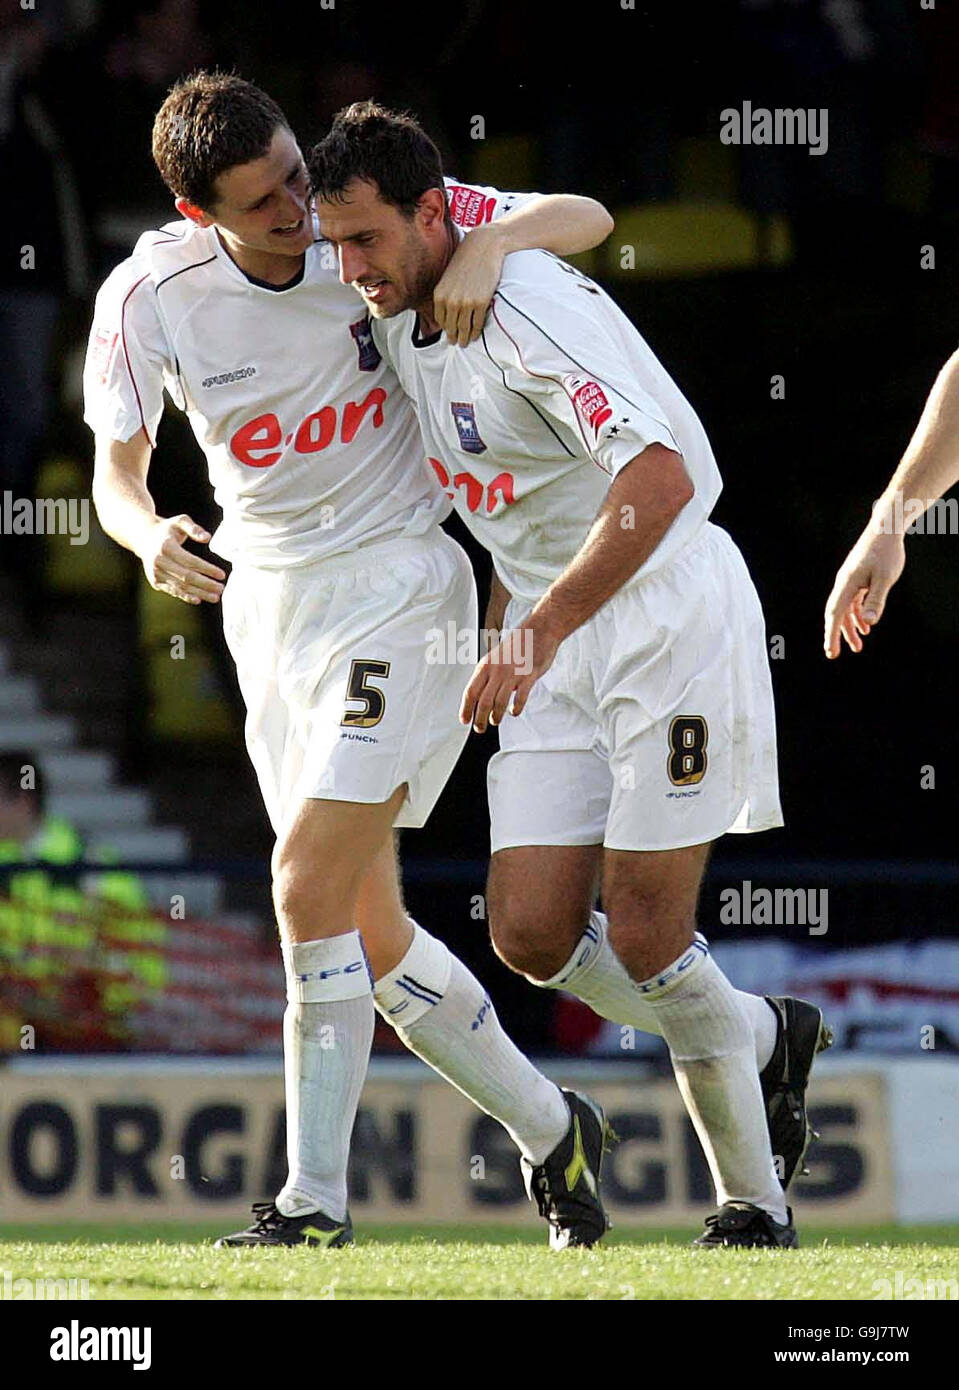 Southend's Sylvain Legwinski (right) celebrates scoring a goal against Ipswich Town during the Coca-Cola Championship match at Roots Hall, Southend-on-Sea. Stock Photo